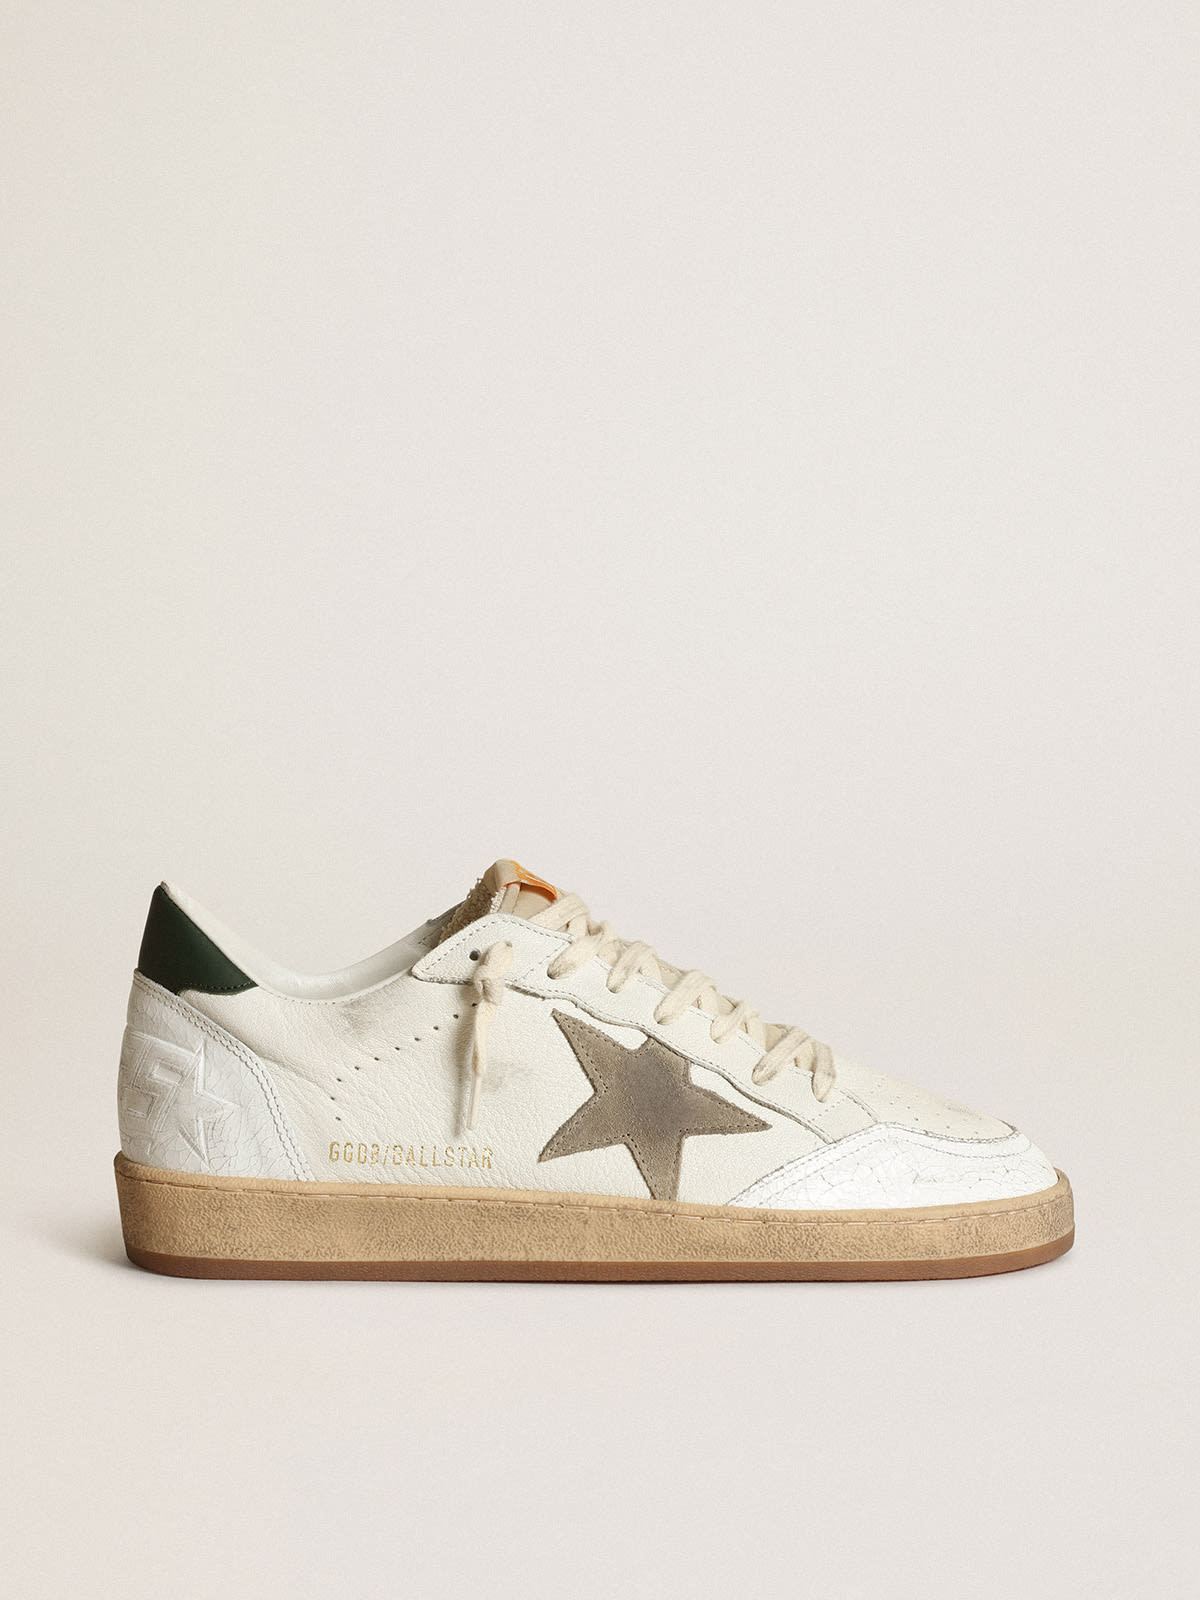 Golden Goose - Ball Star sneakers in white nappa leather with dove-gray suede star and dark green leather heel tab in 